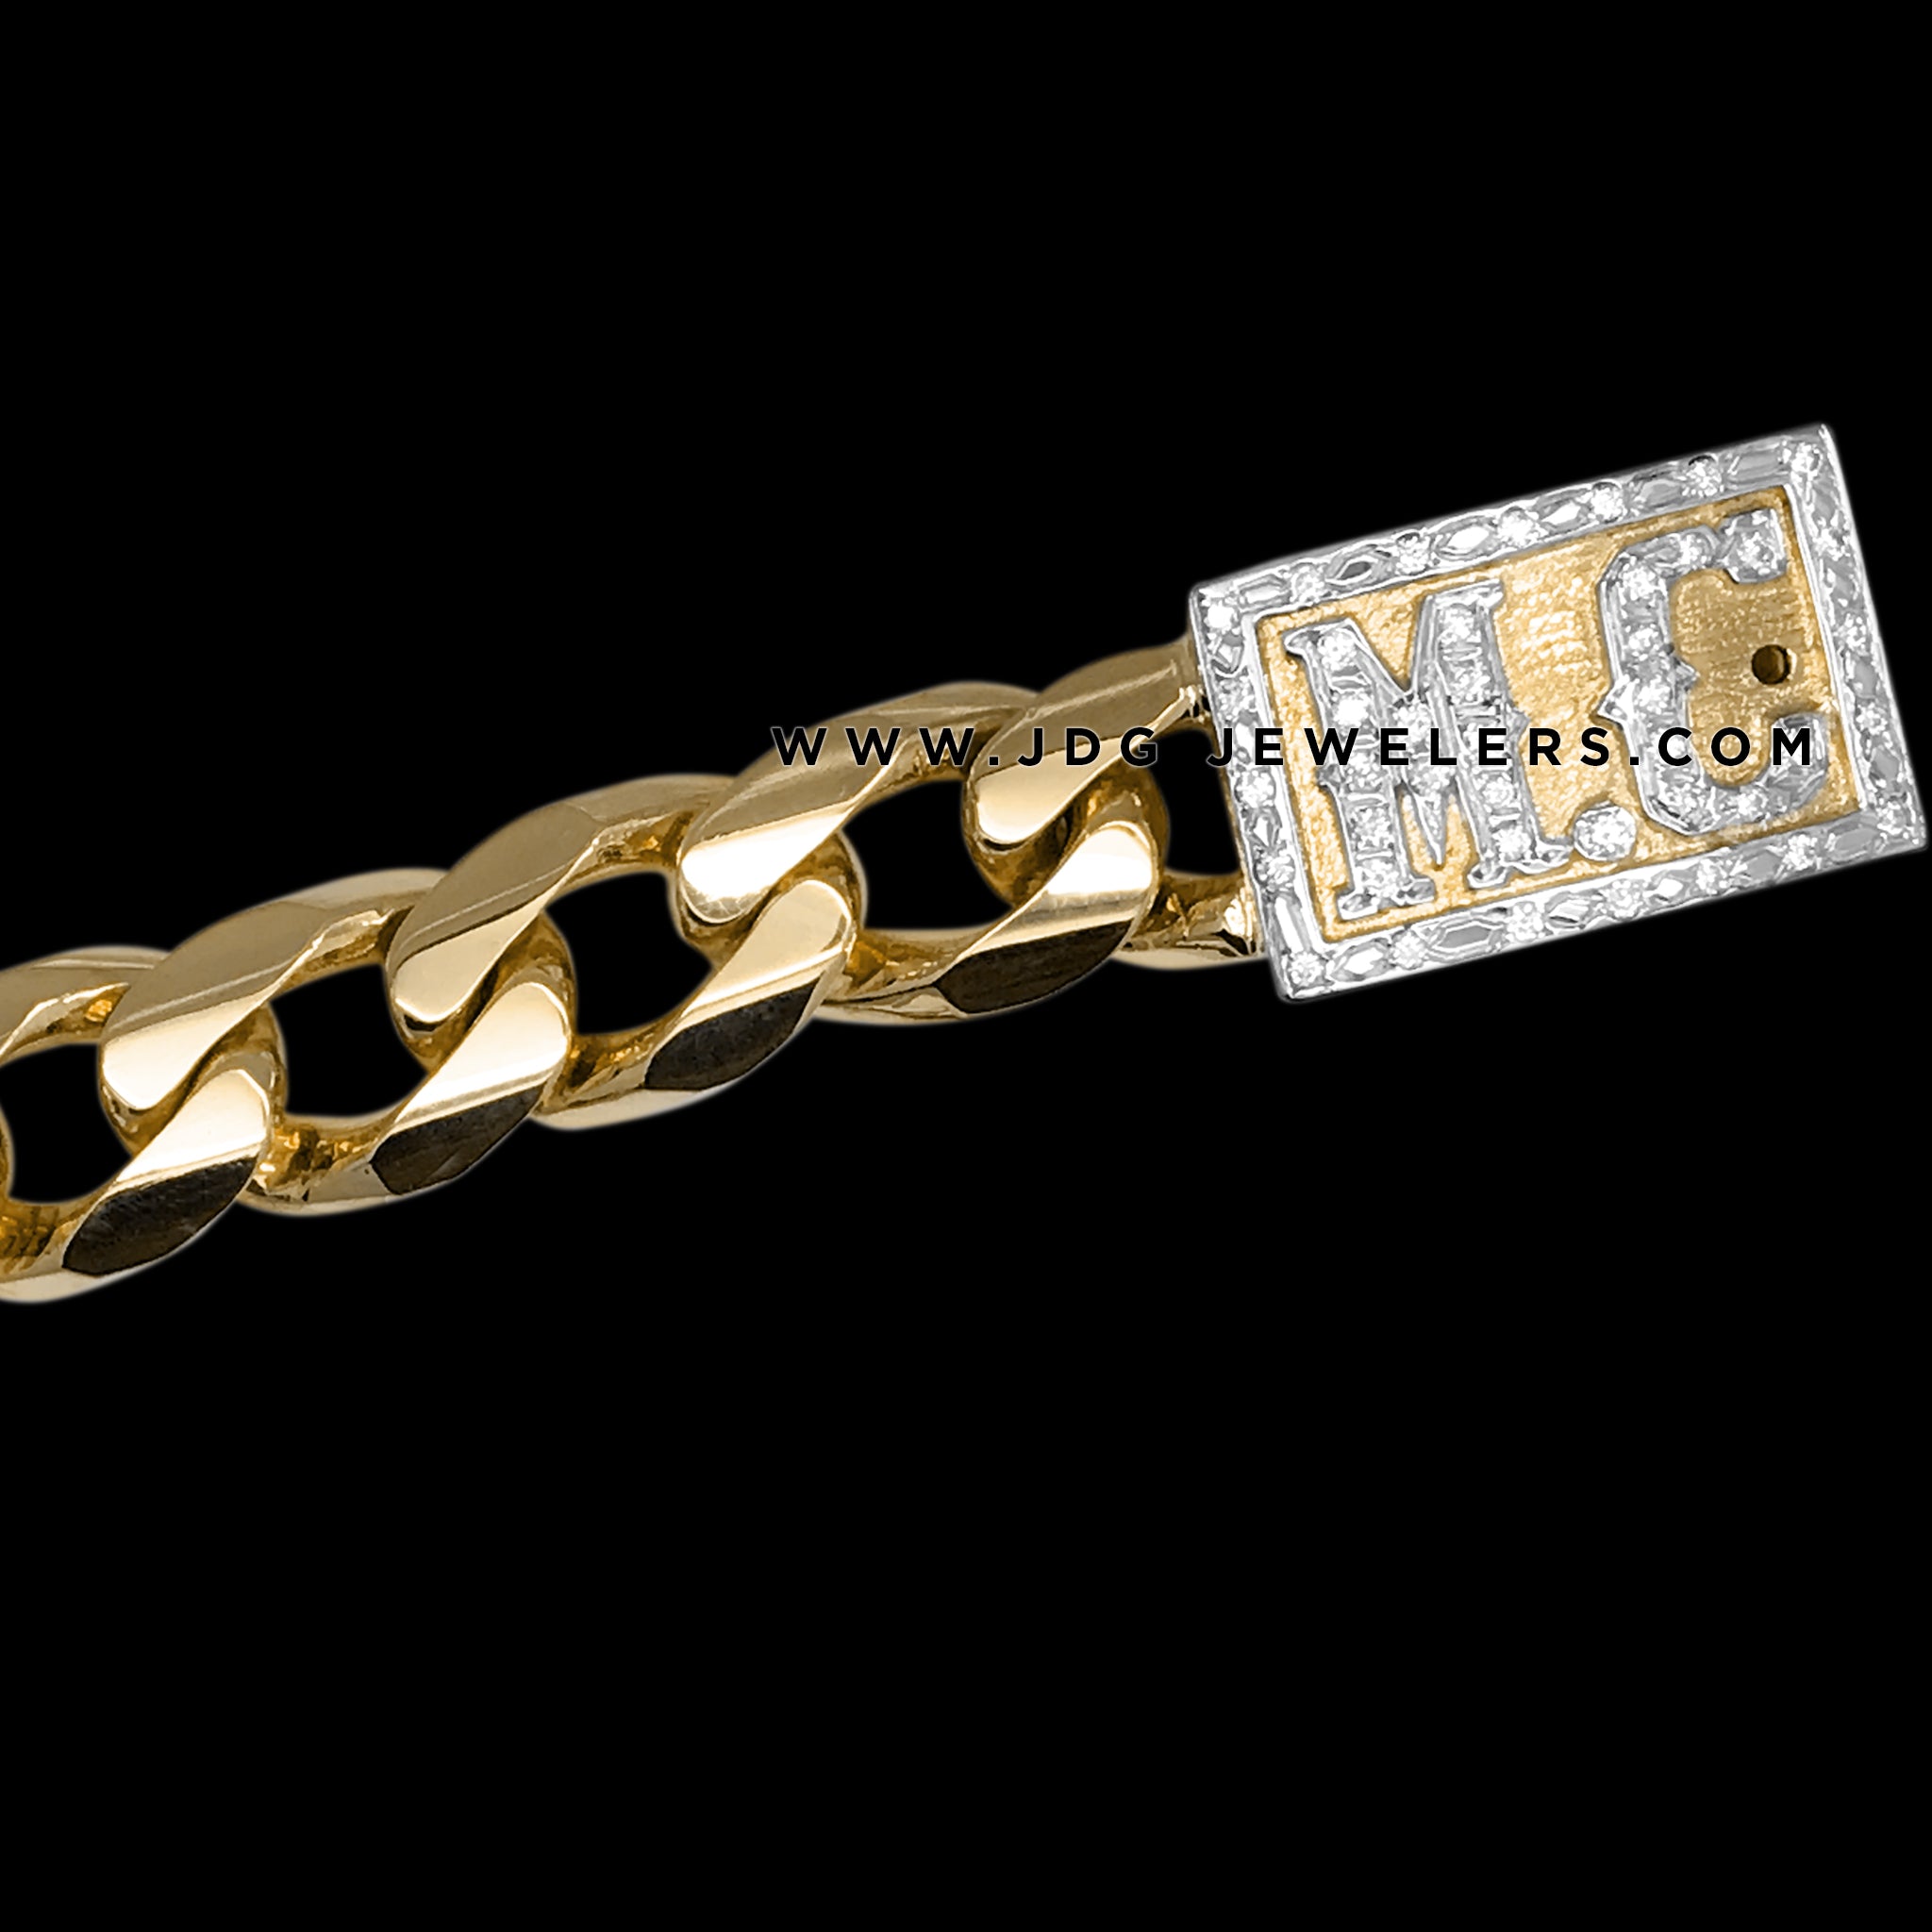 Cuban Link Bracelet with Stones on Border and Letters